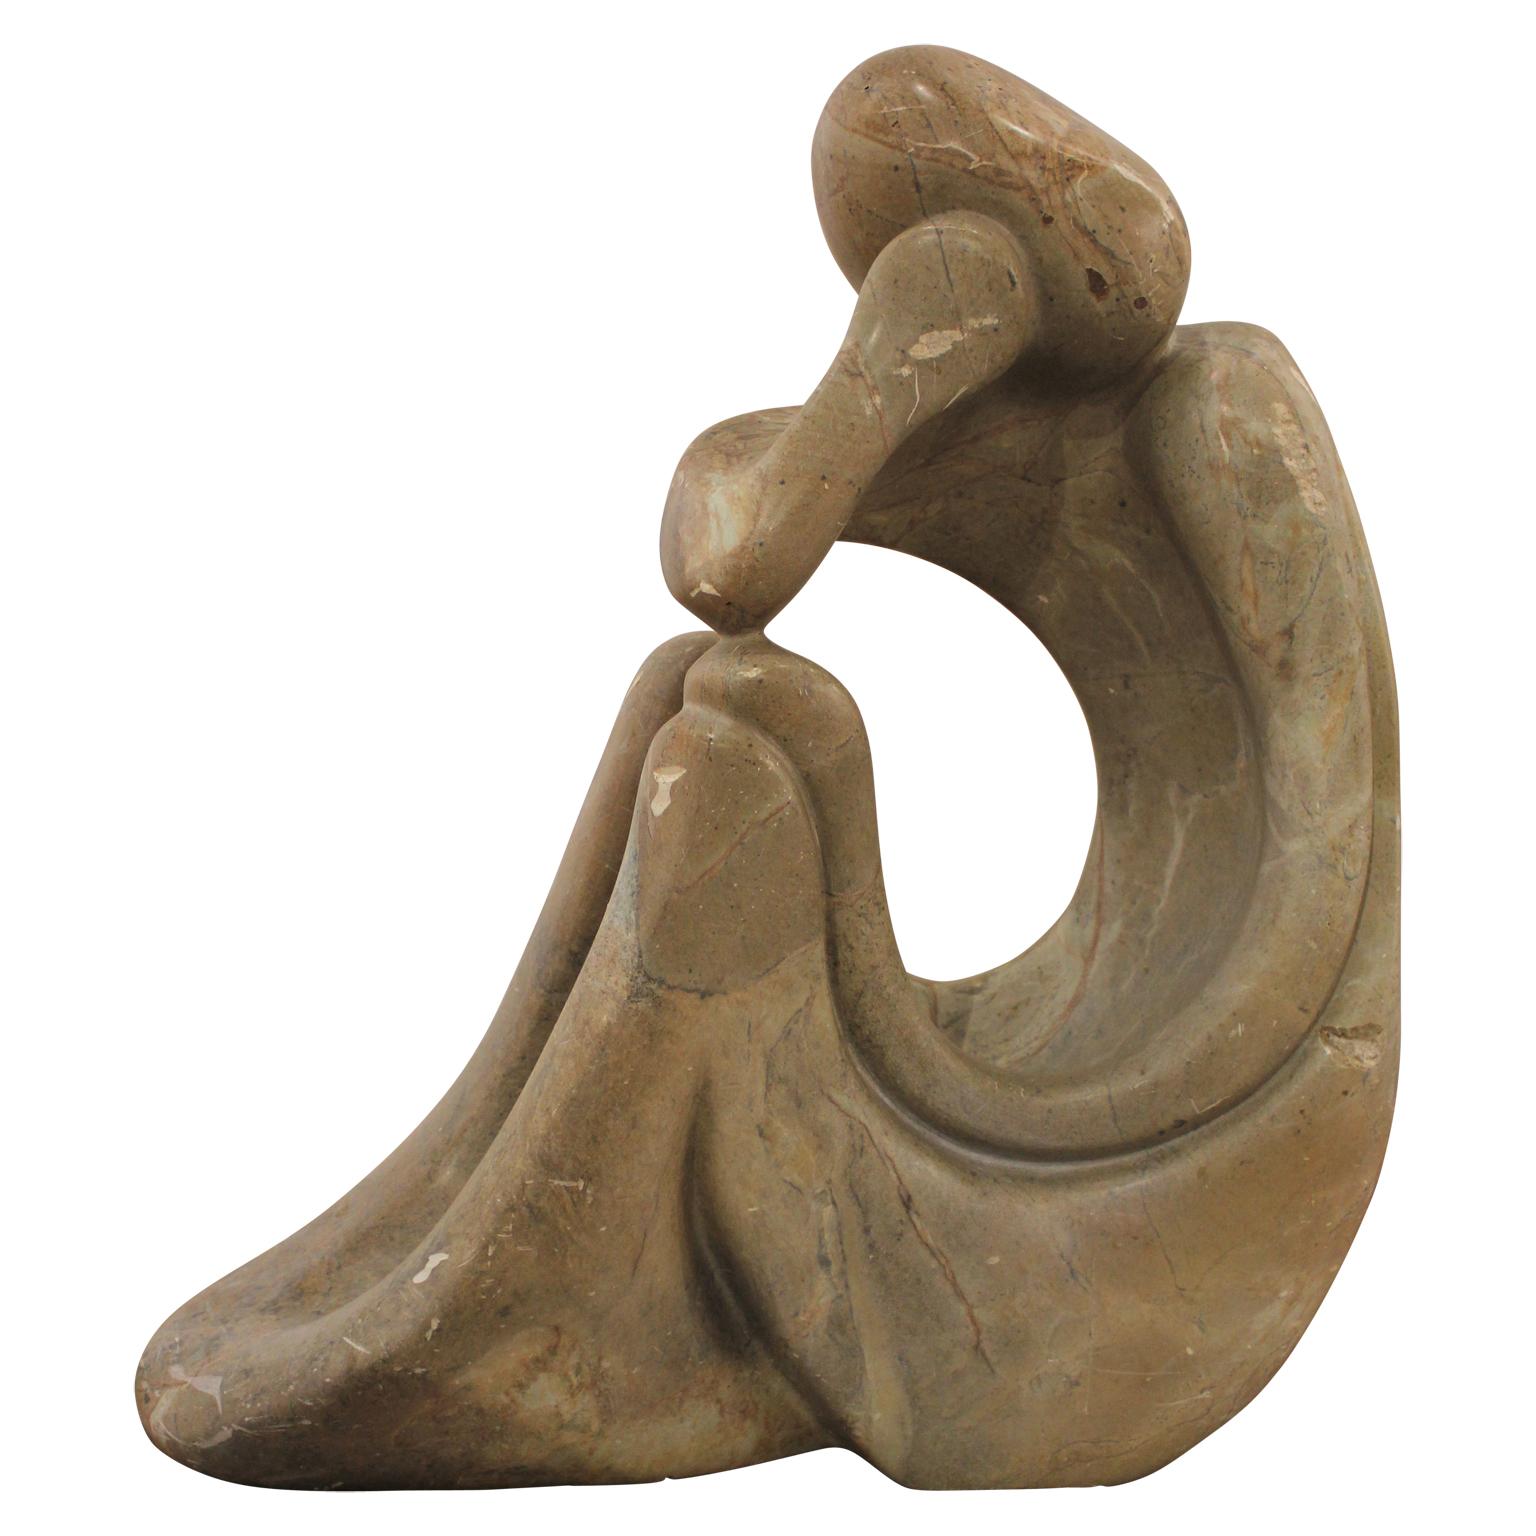 Jose Zacarias Figurative Sculpture - Seated Thinking Women in a Long Dress